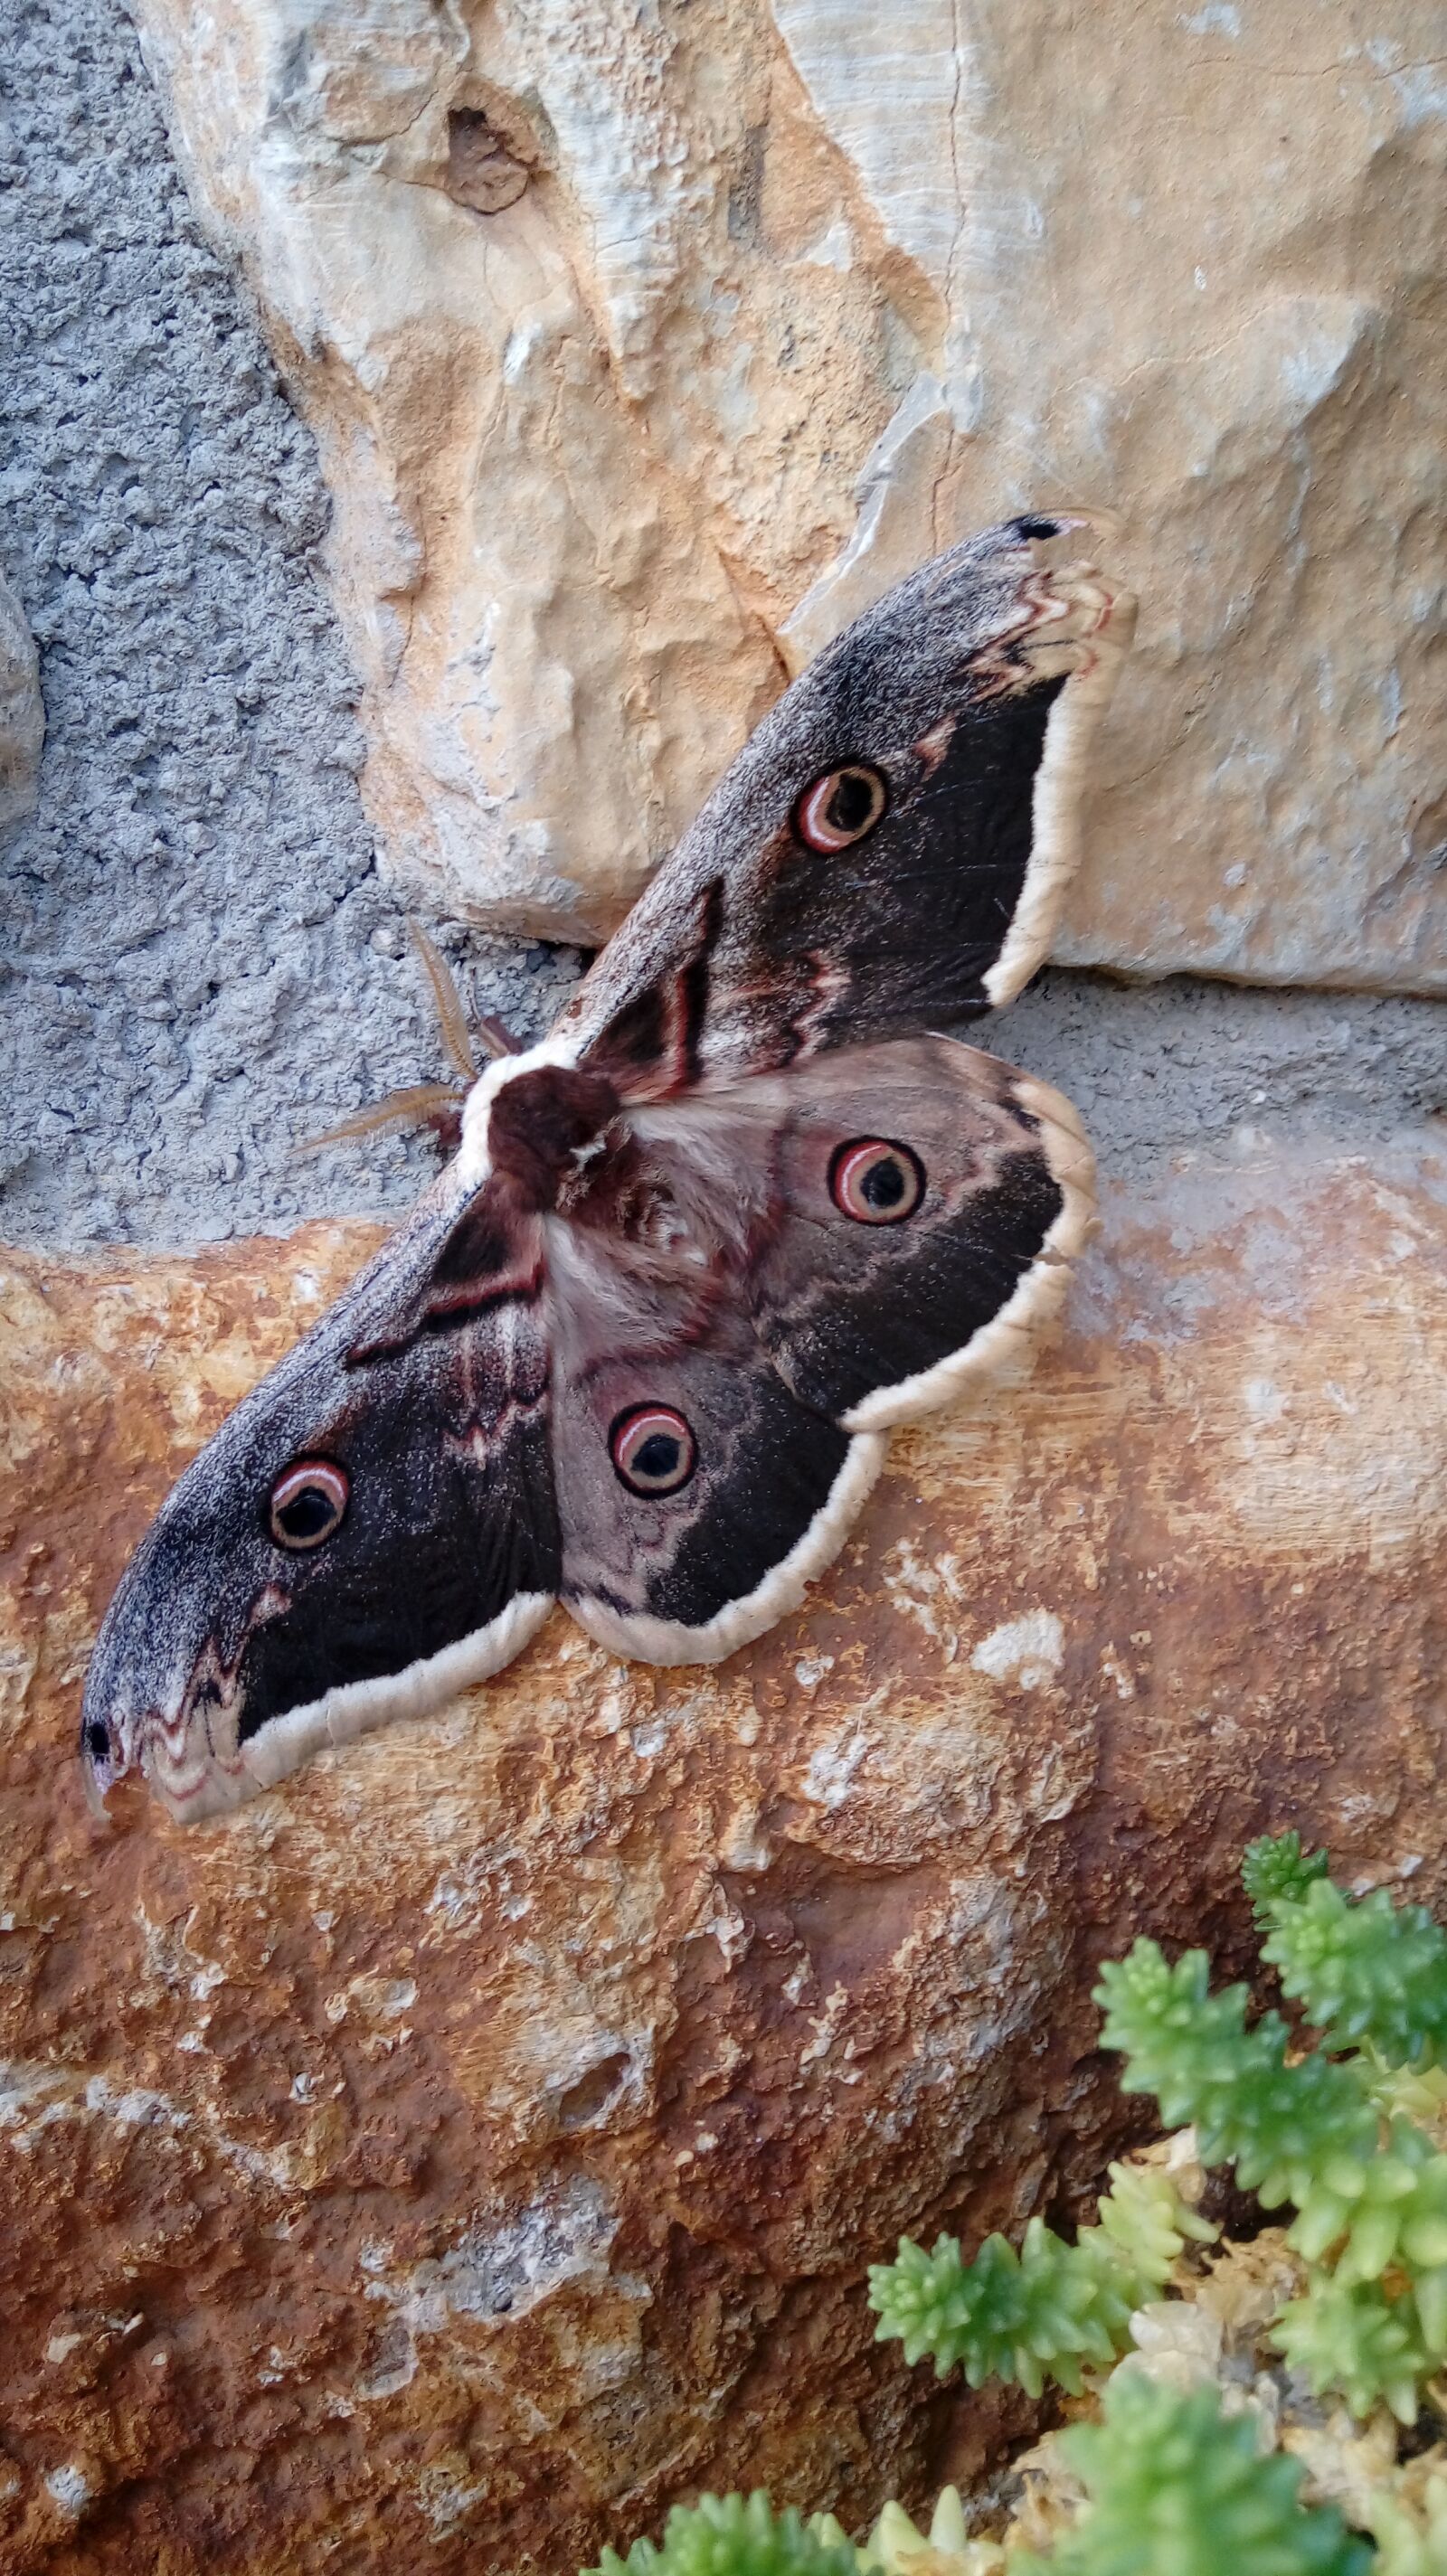 LG X POWER sample photo. Moth, insect, giant photography